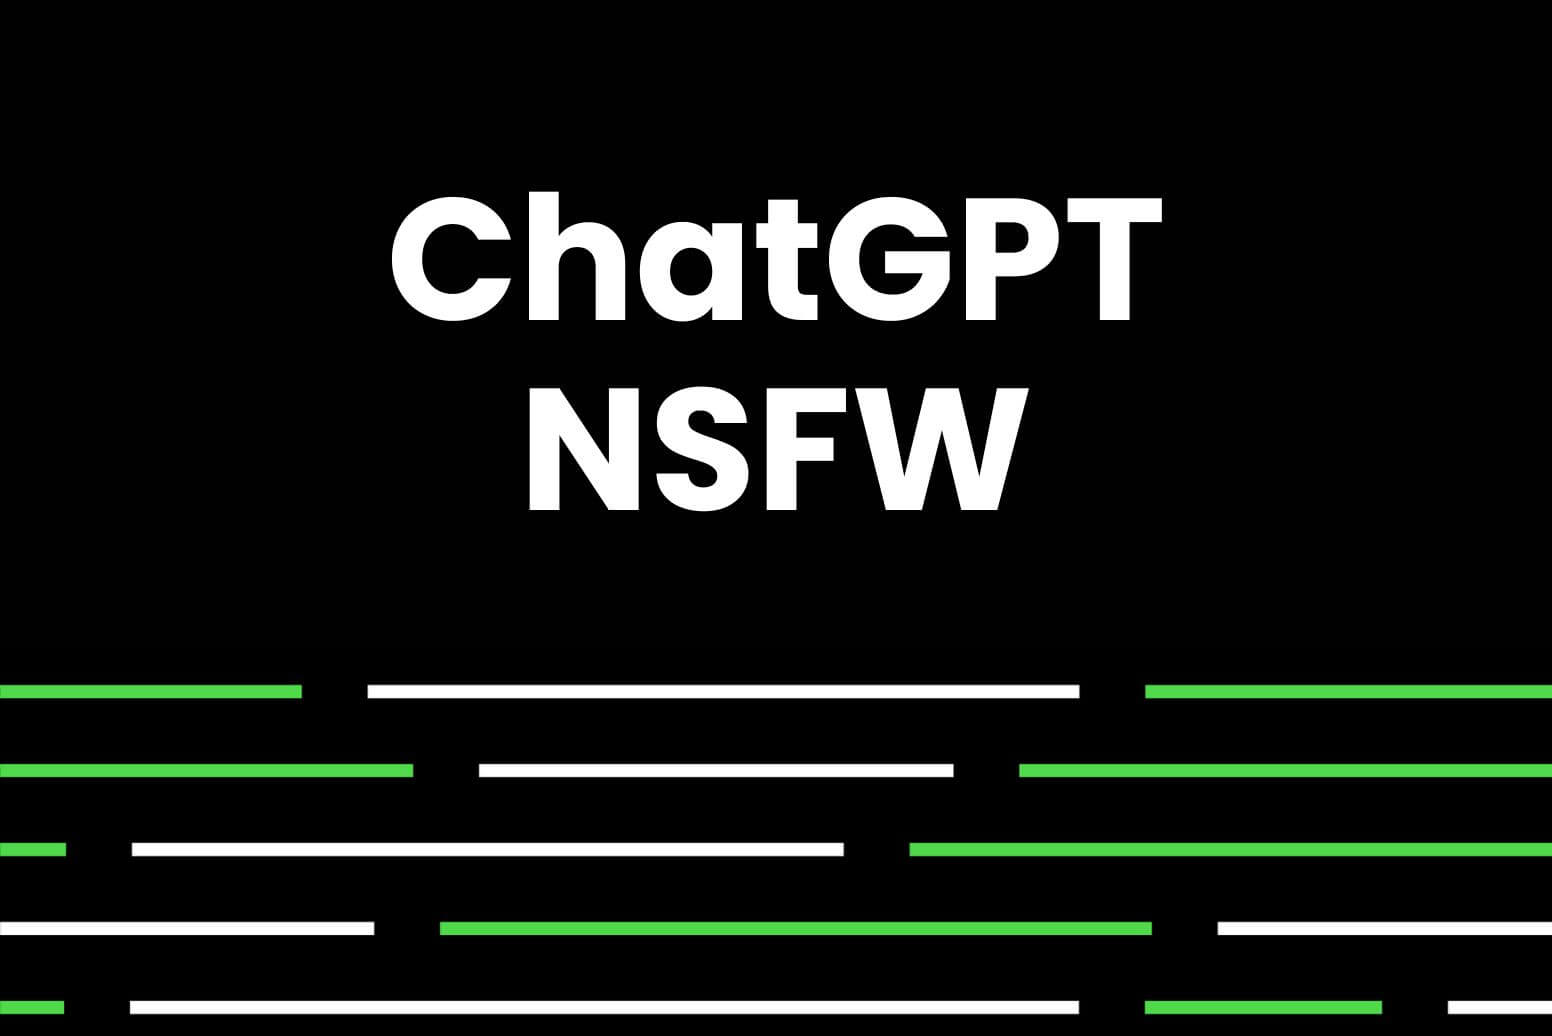 ChatGPT nsfw guide